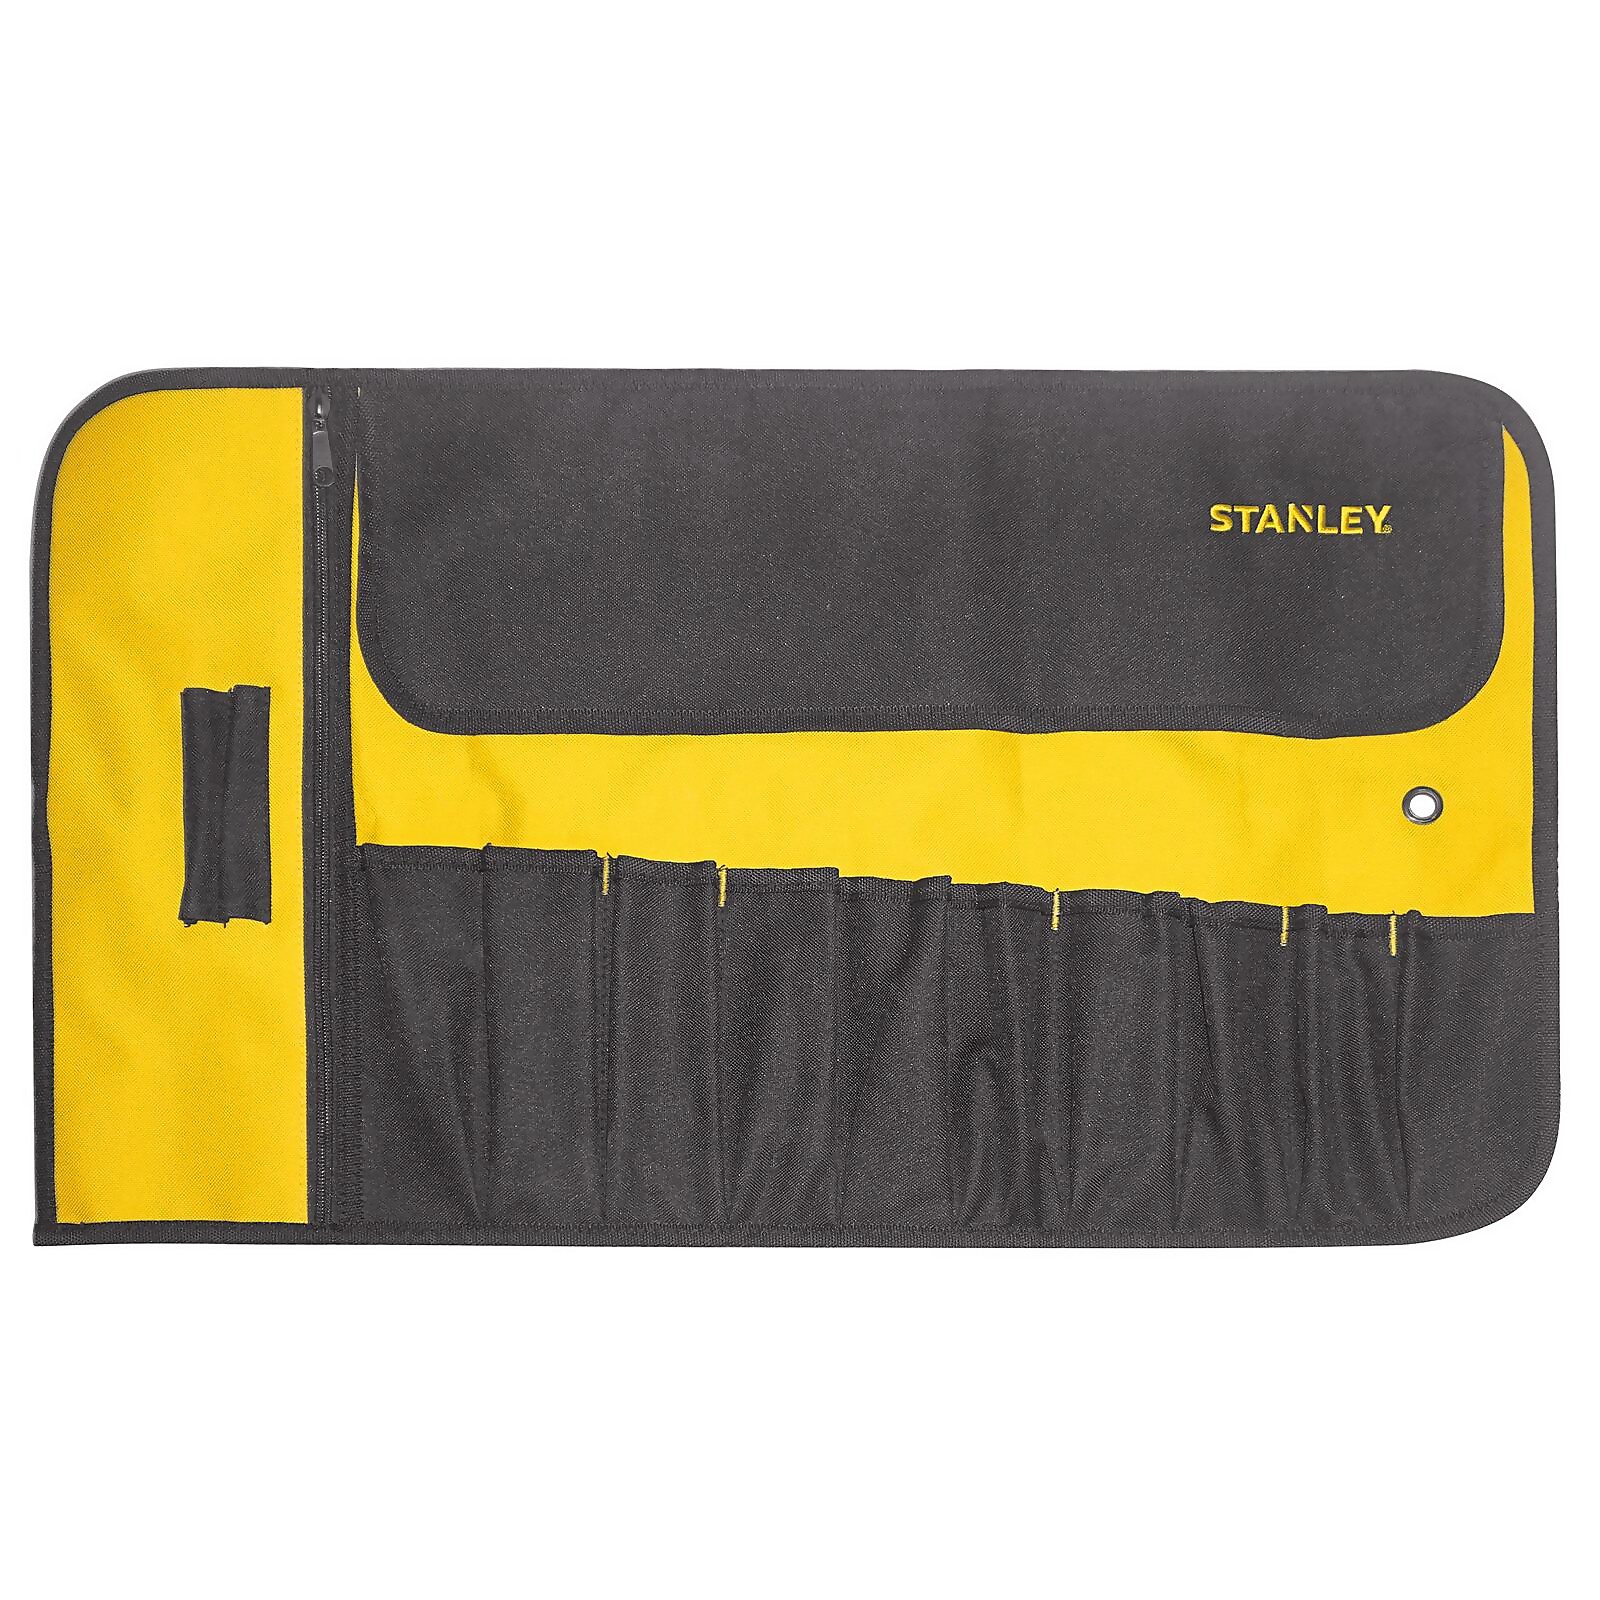 Photo of Stanley 12 Pocket Tool Roll